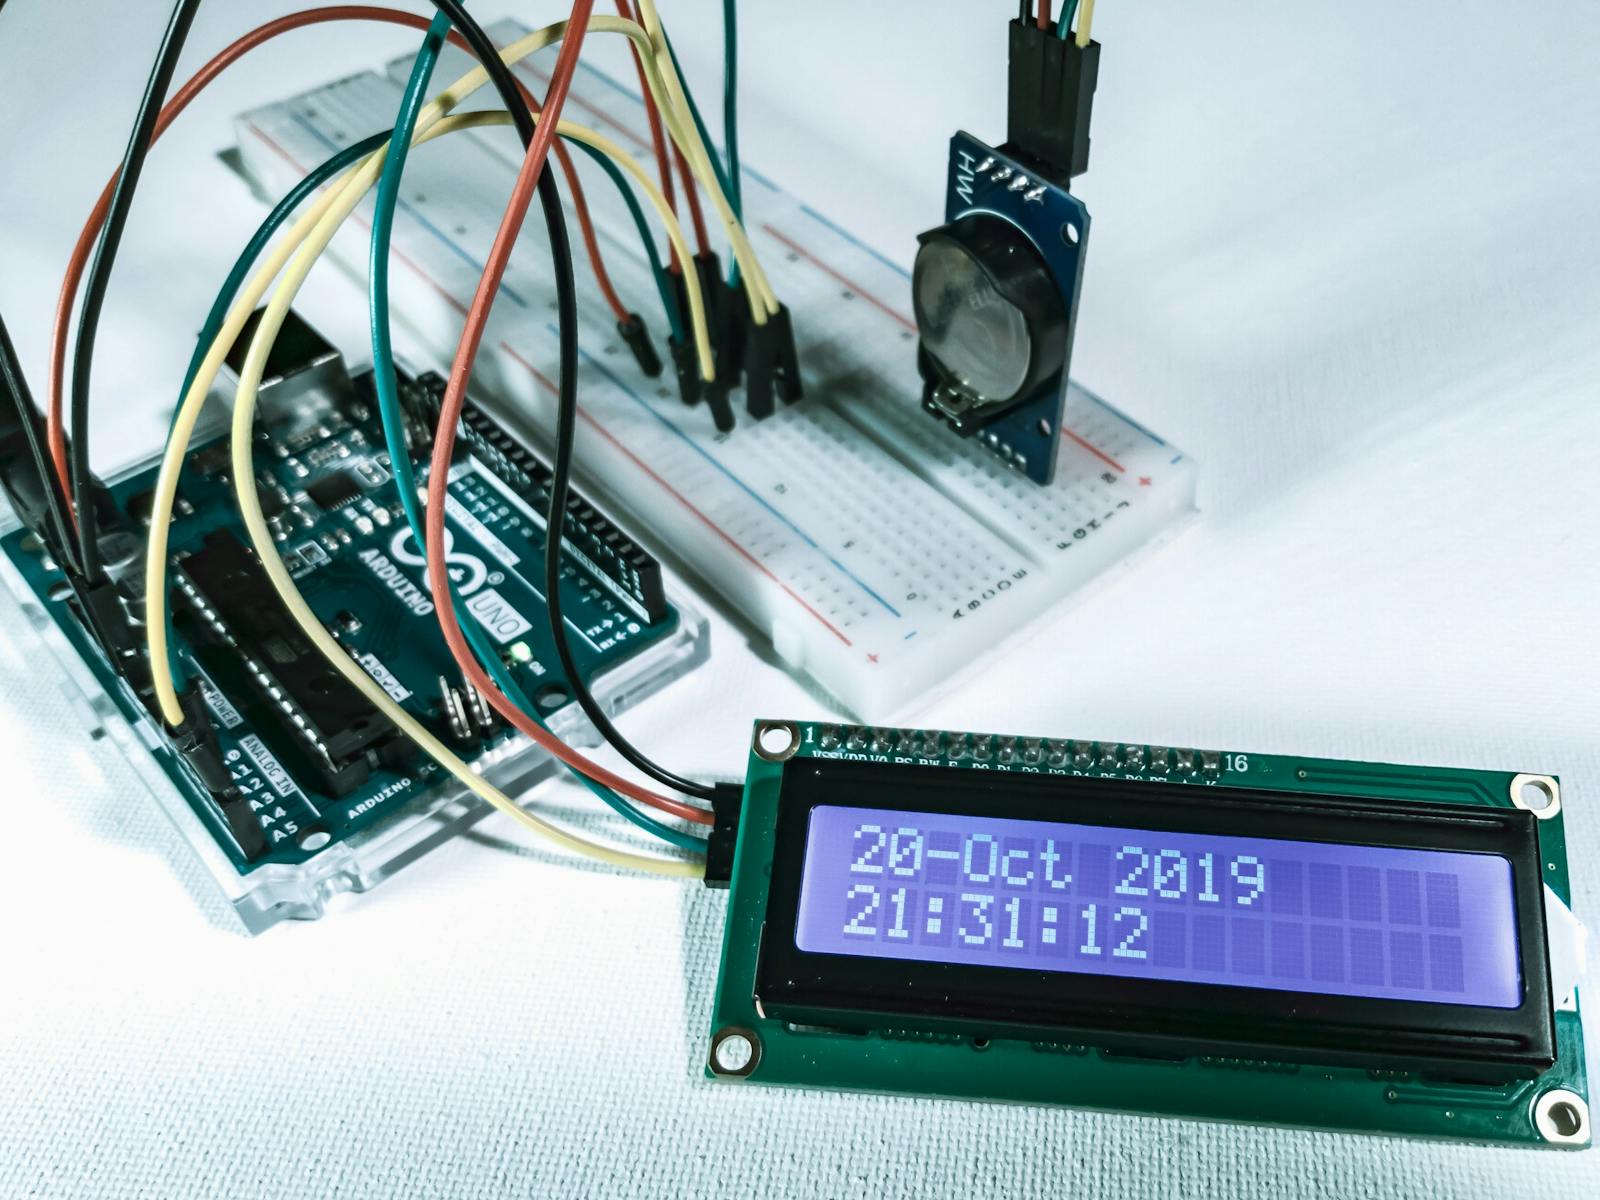 real time clock